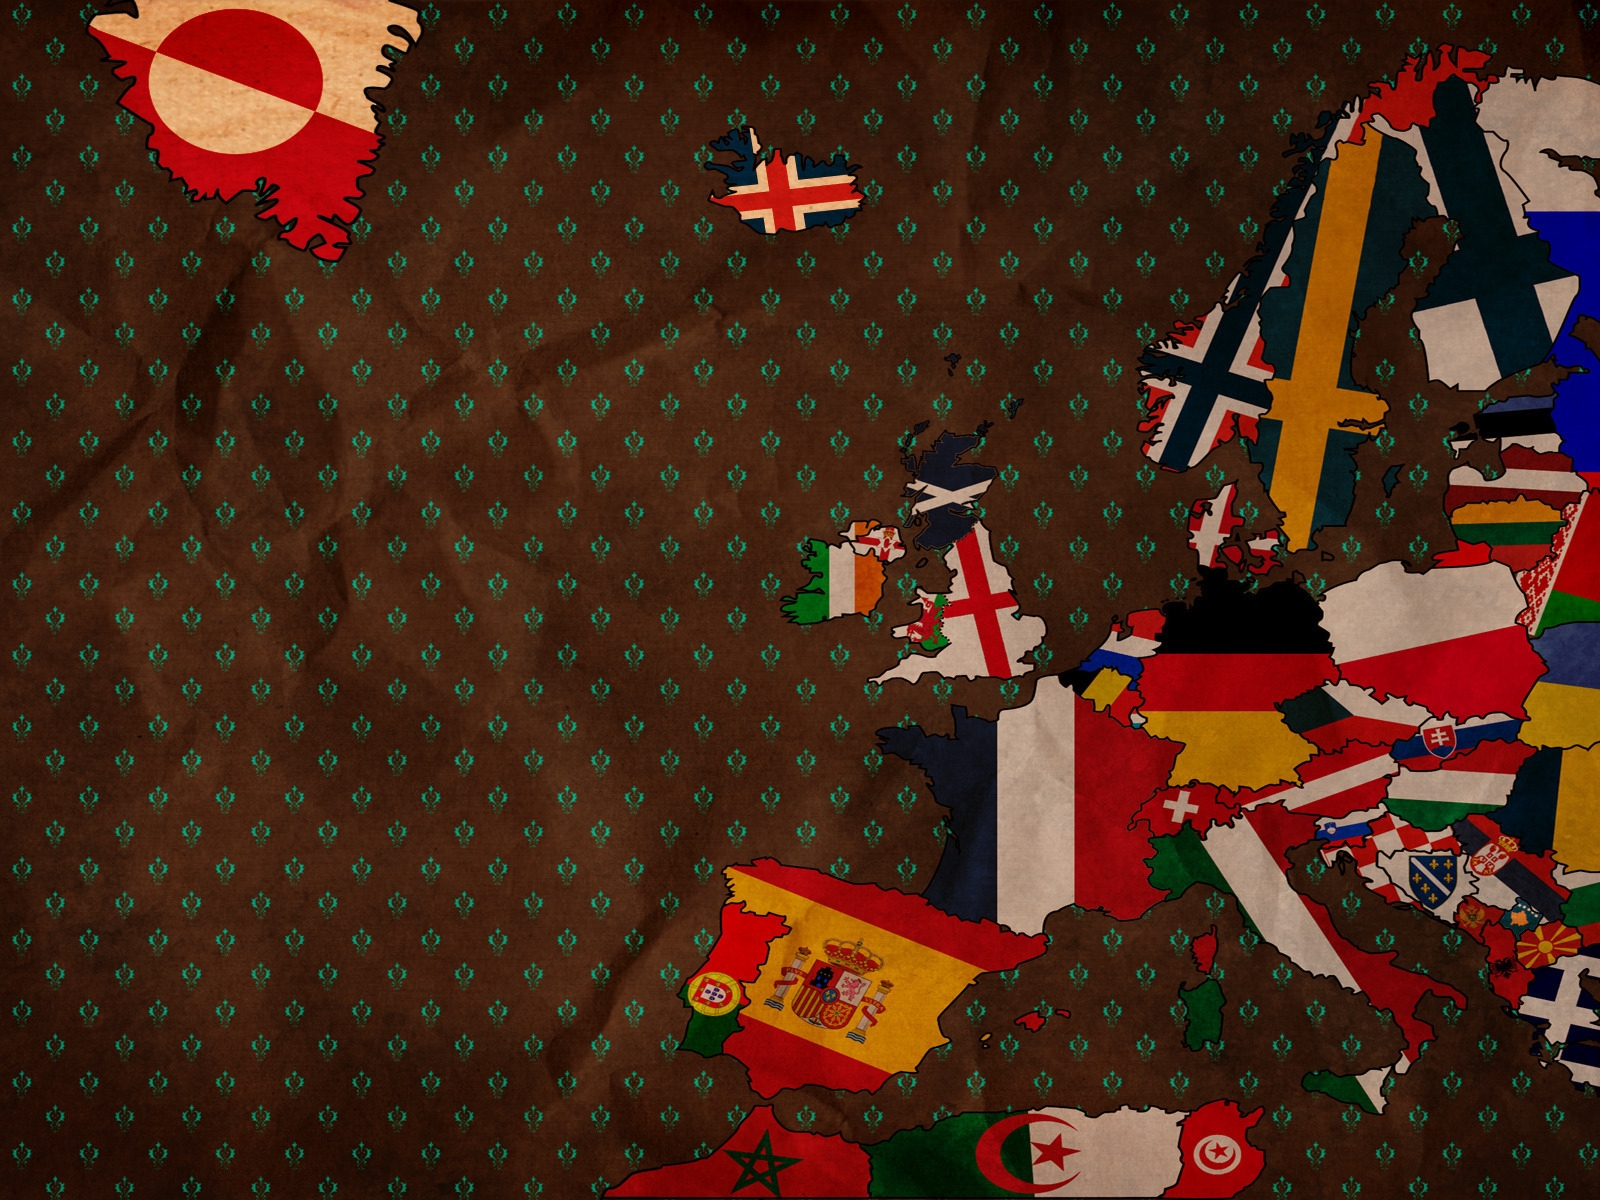 Bits of Flags for 1600 x 1200 resolution